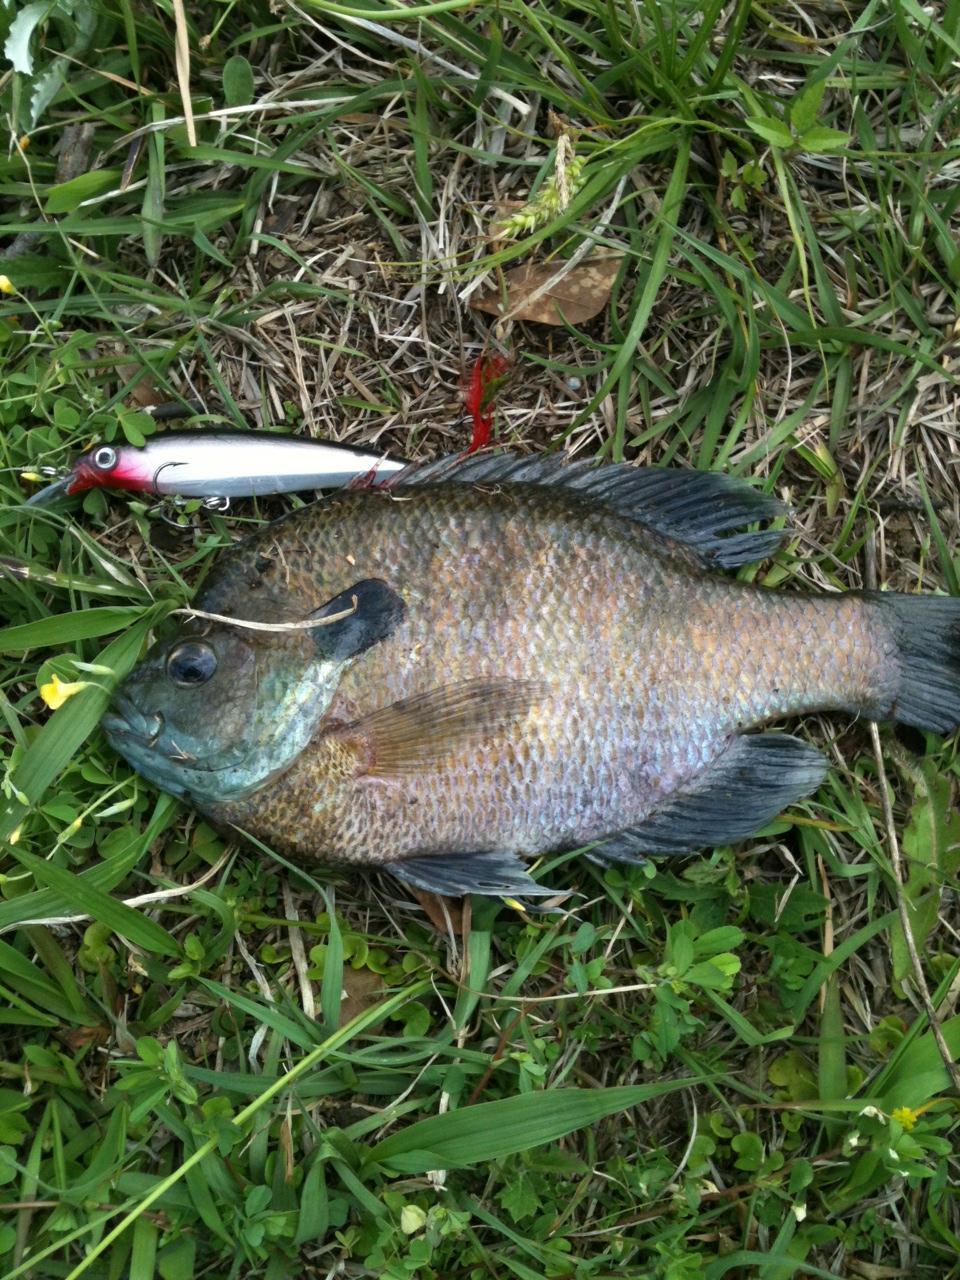 There are so many bream in the lake that they are hitting bass lures.